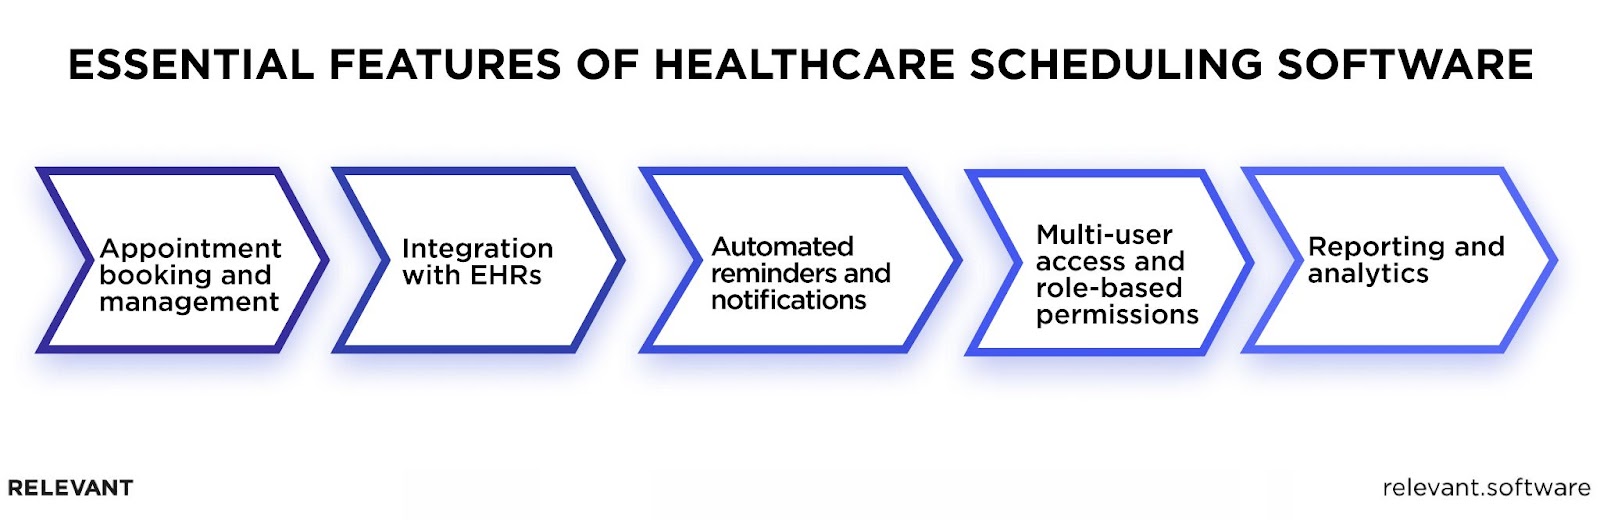 Features of Healthcare Scheduling Software Systems